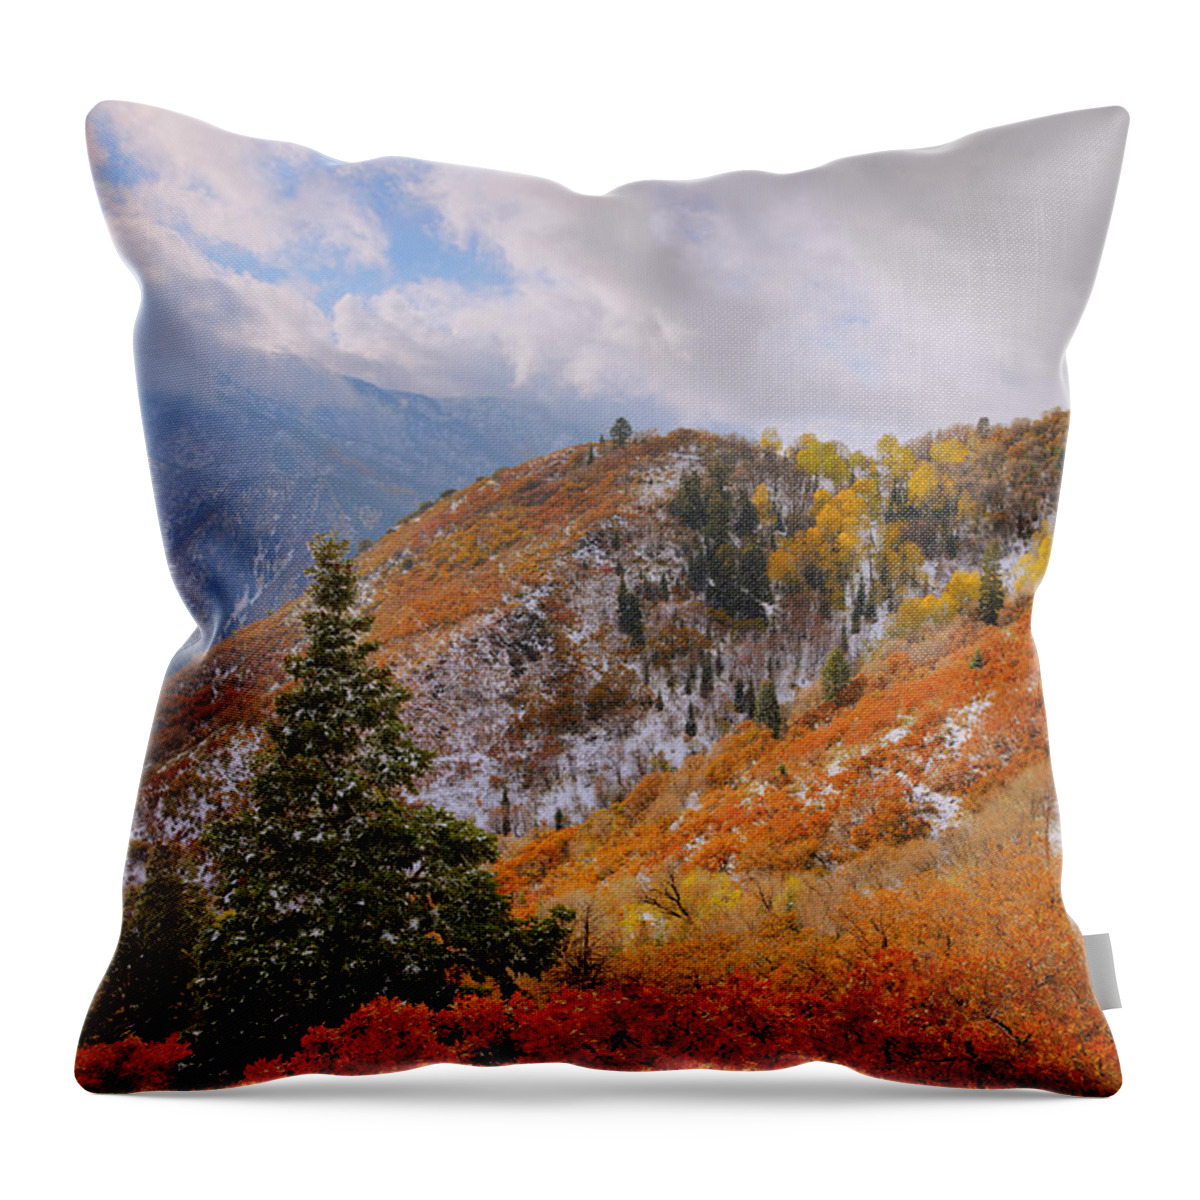 Forest Throw Pillow featuring the photograph Last Fall by Chad Dutson